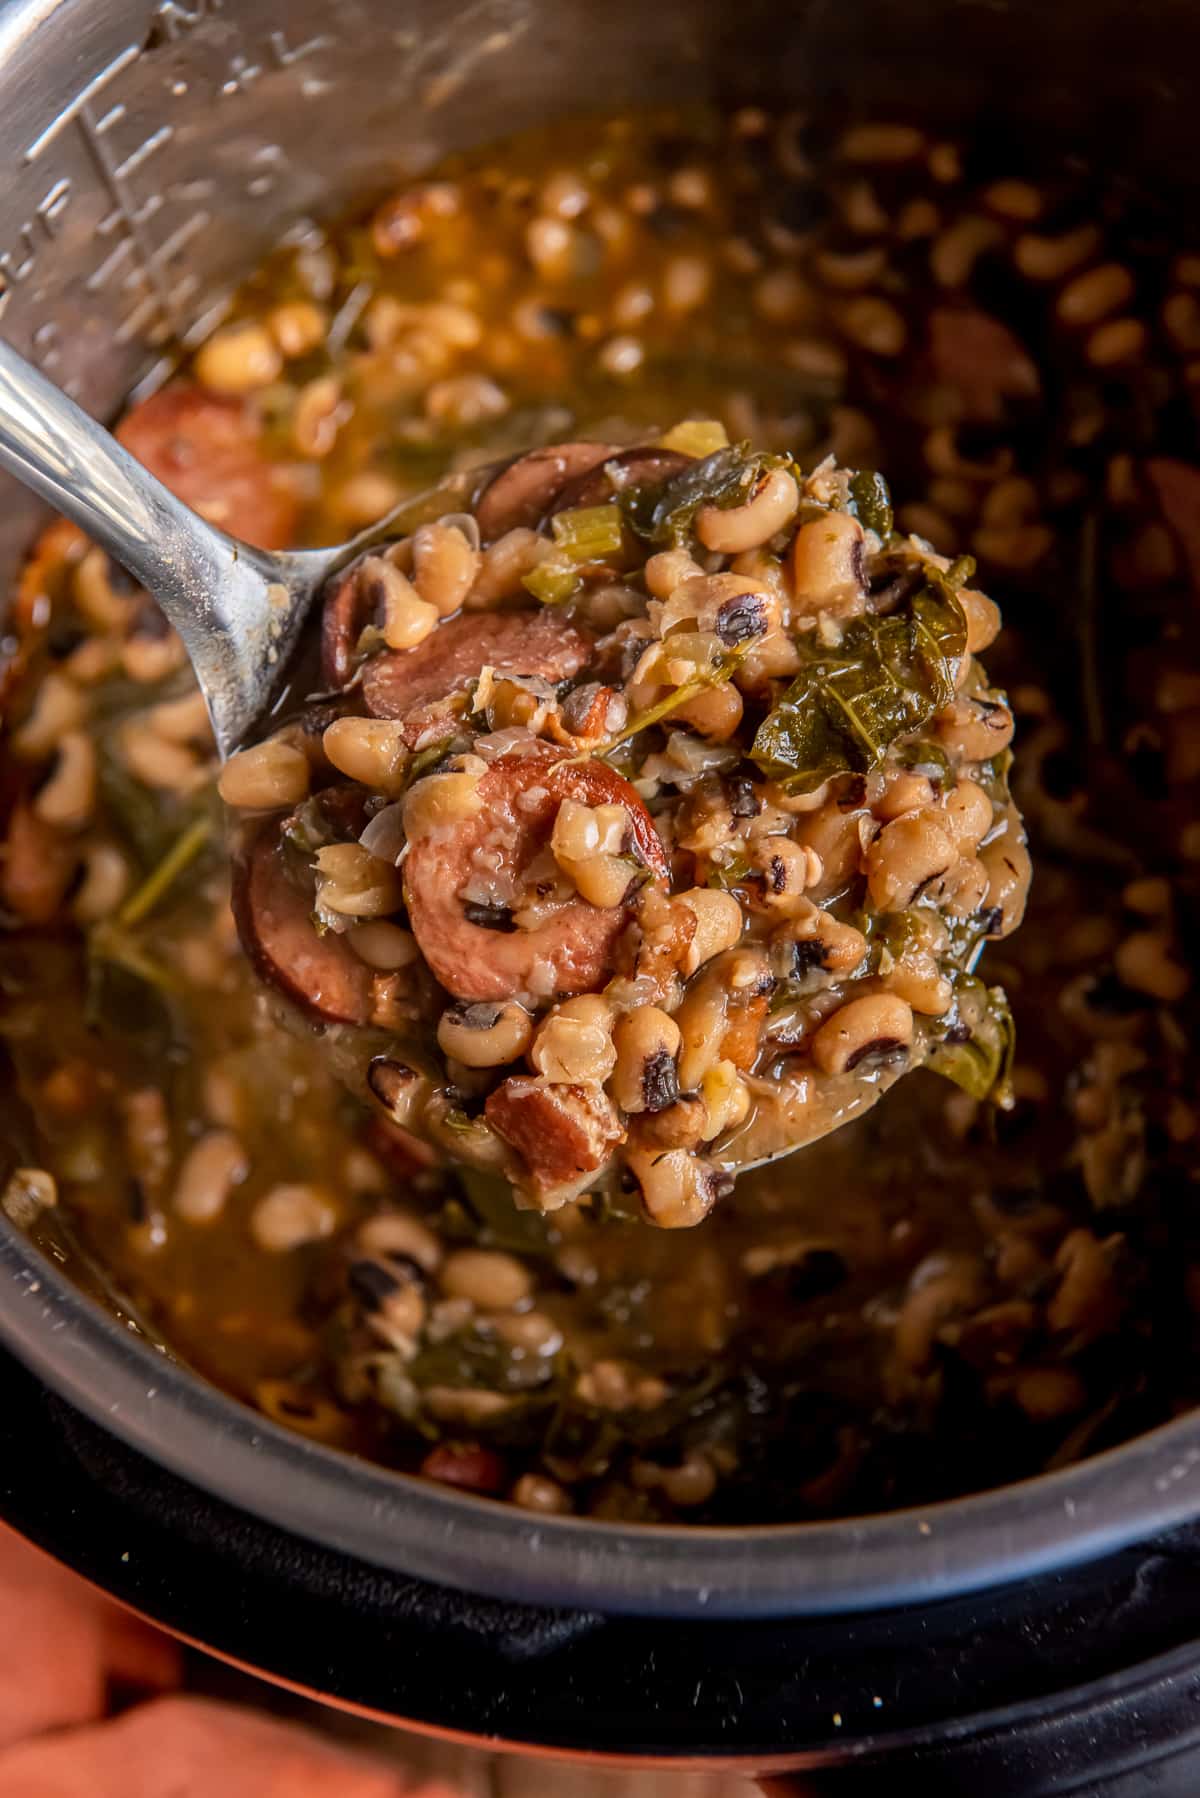 A ladle scooping Black Eyed Peas with collards and sausage from an Instant Pot.